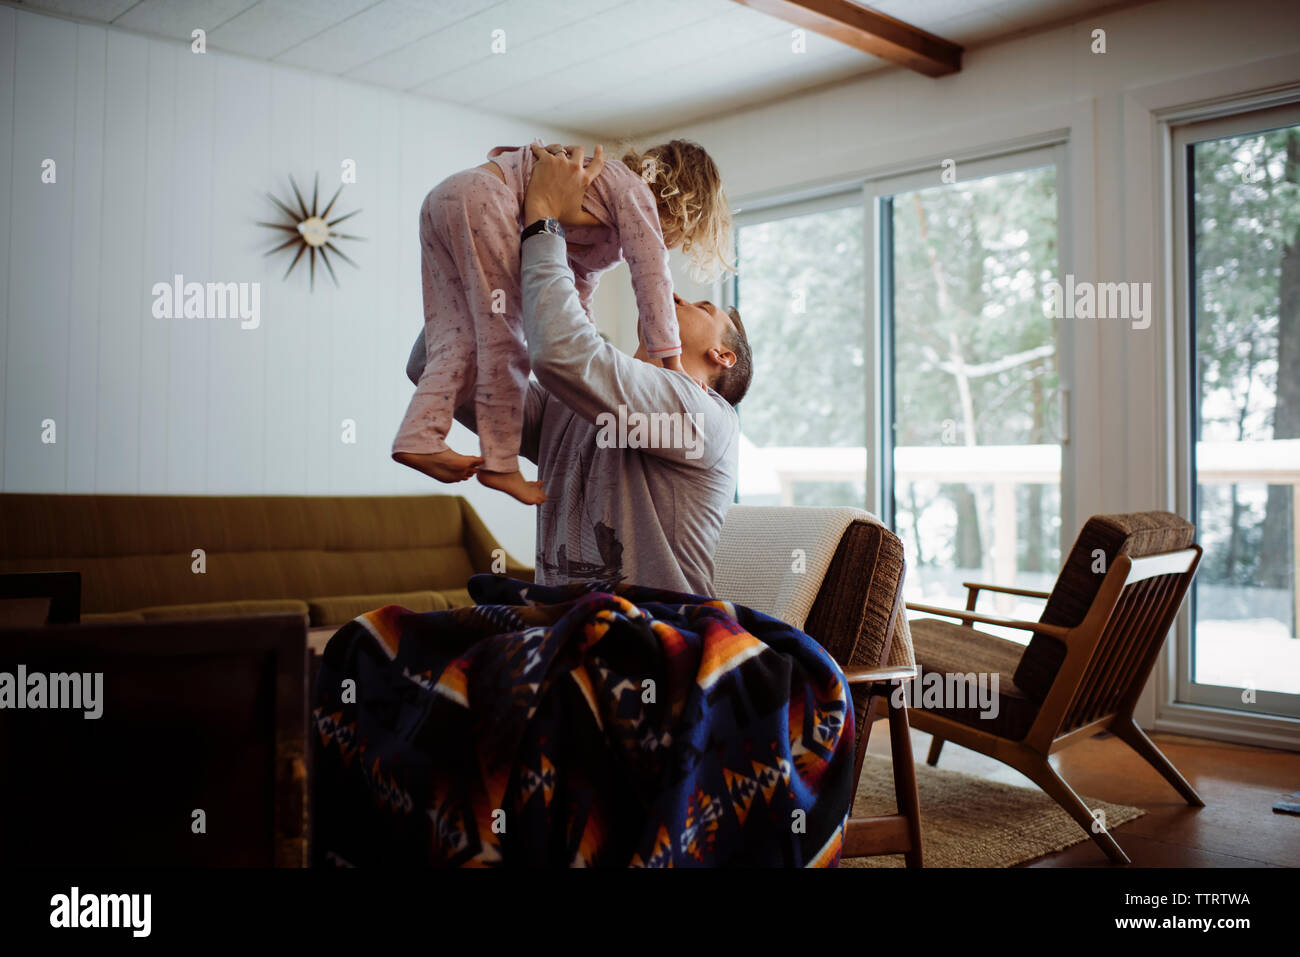 Father picking up daughter while sitting on chair at home Stock Photo